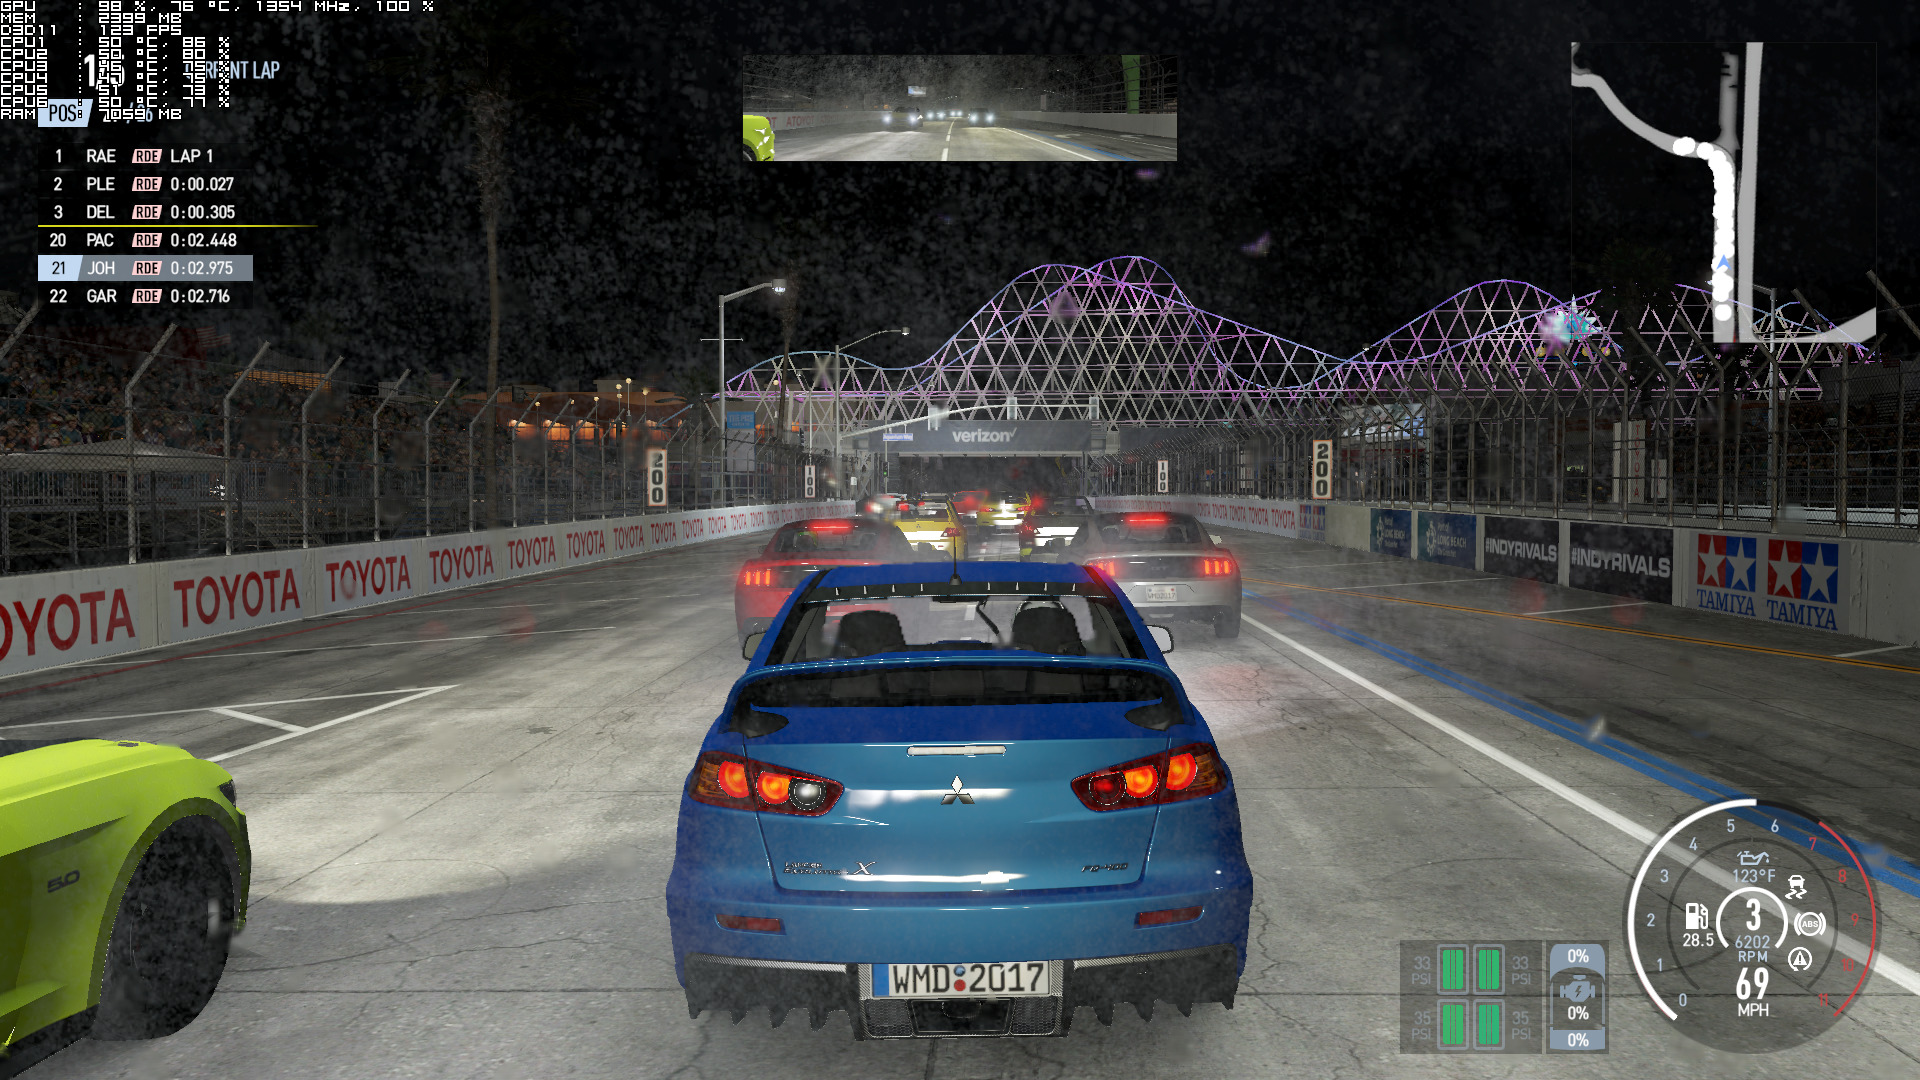 Project CARS 2 system requirements